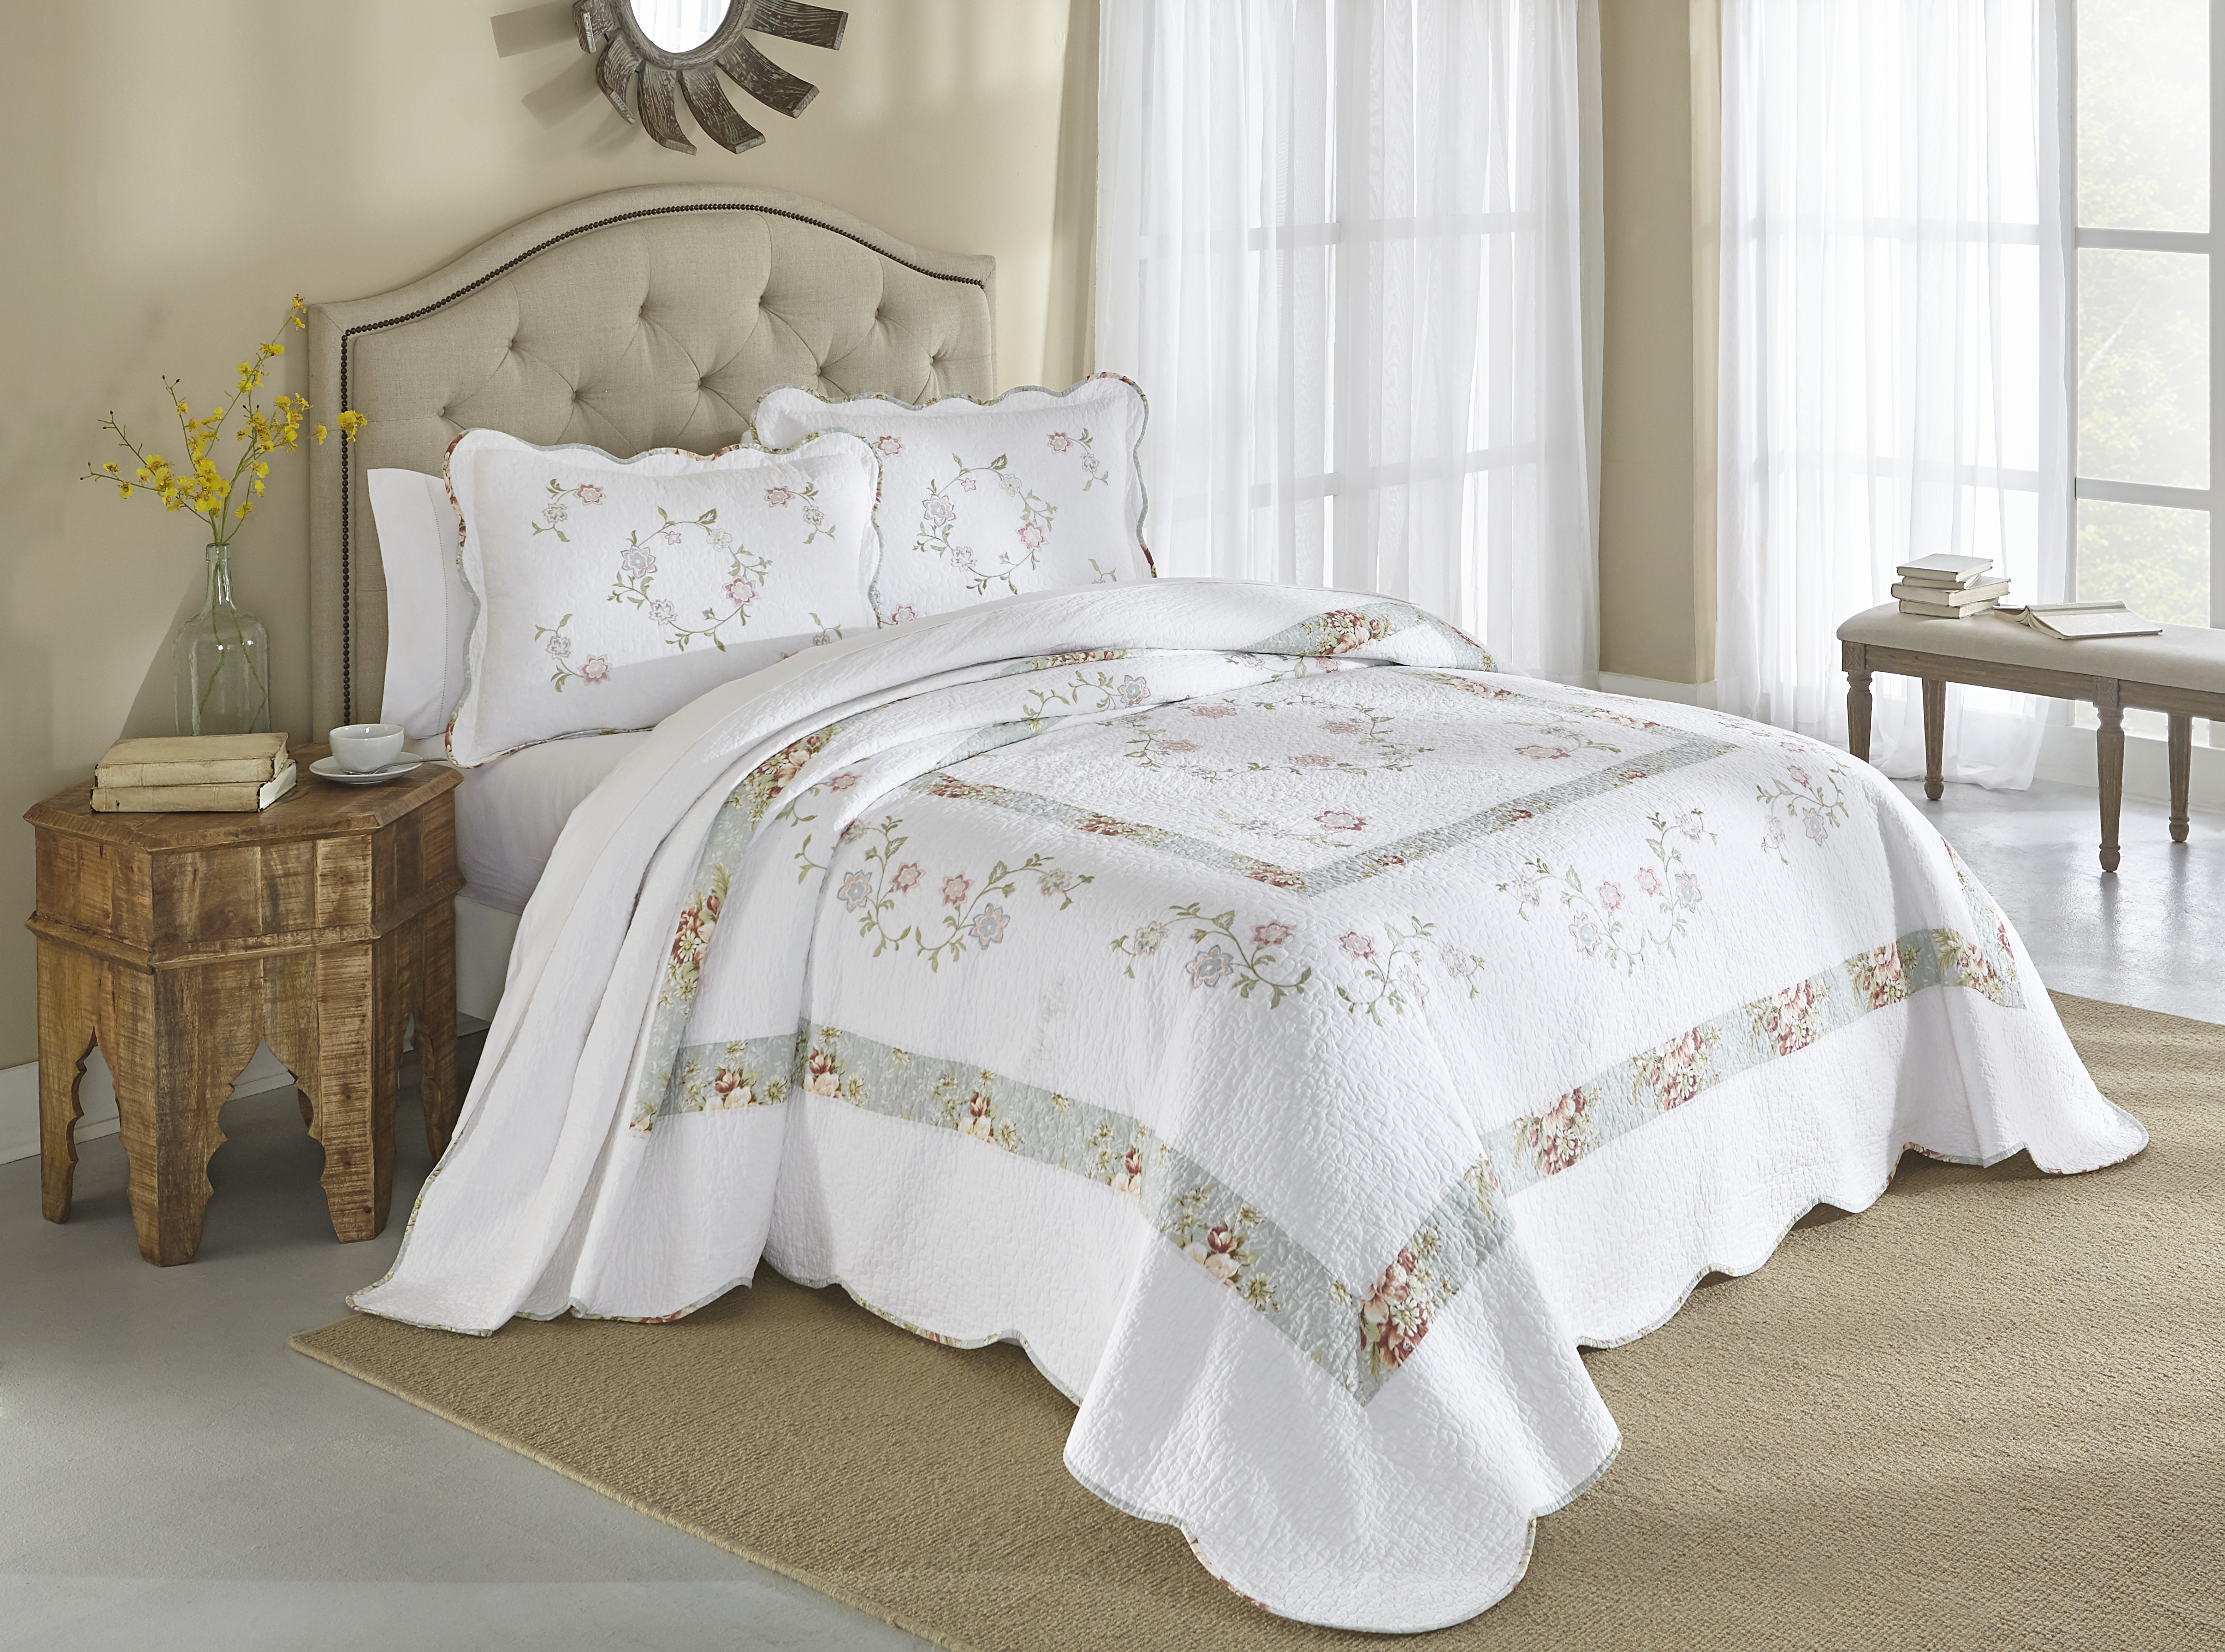 Cannon Embroidered Bedspread - Fresh Flowers